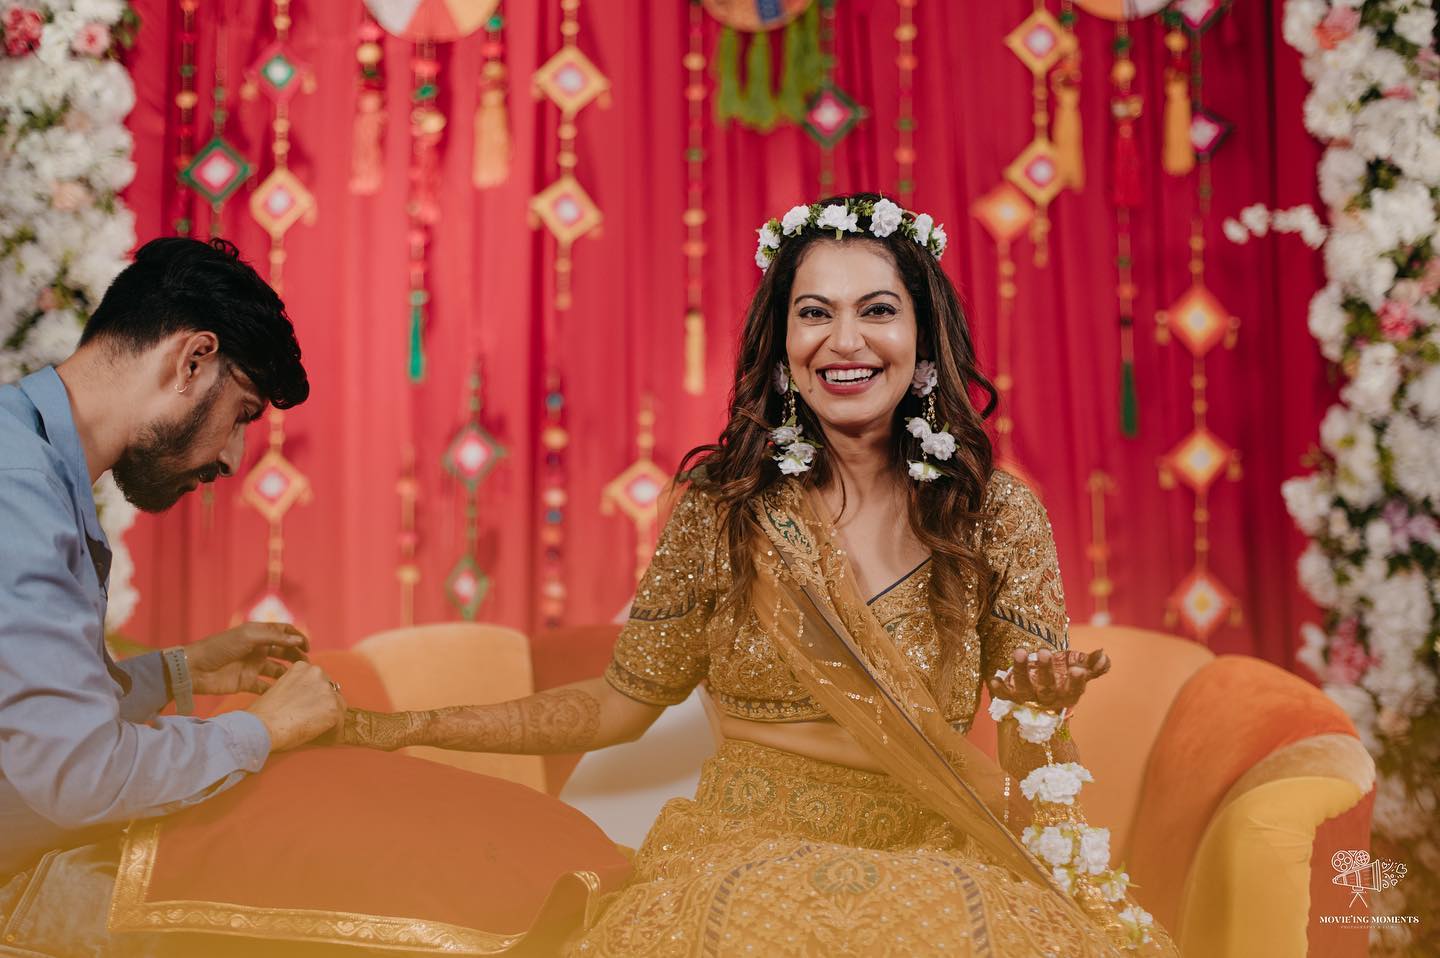 Payal Rohatgi And Sangram Singh Tie The Knot In An Intimate Wedding!